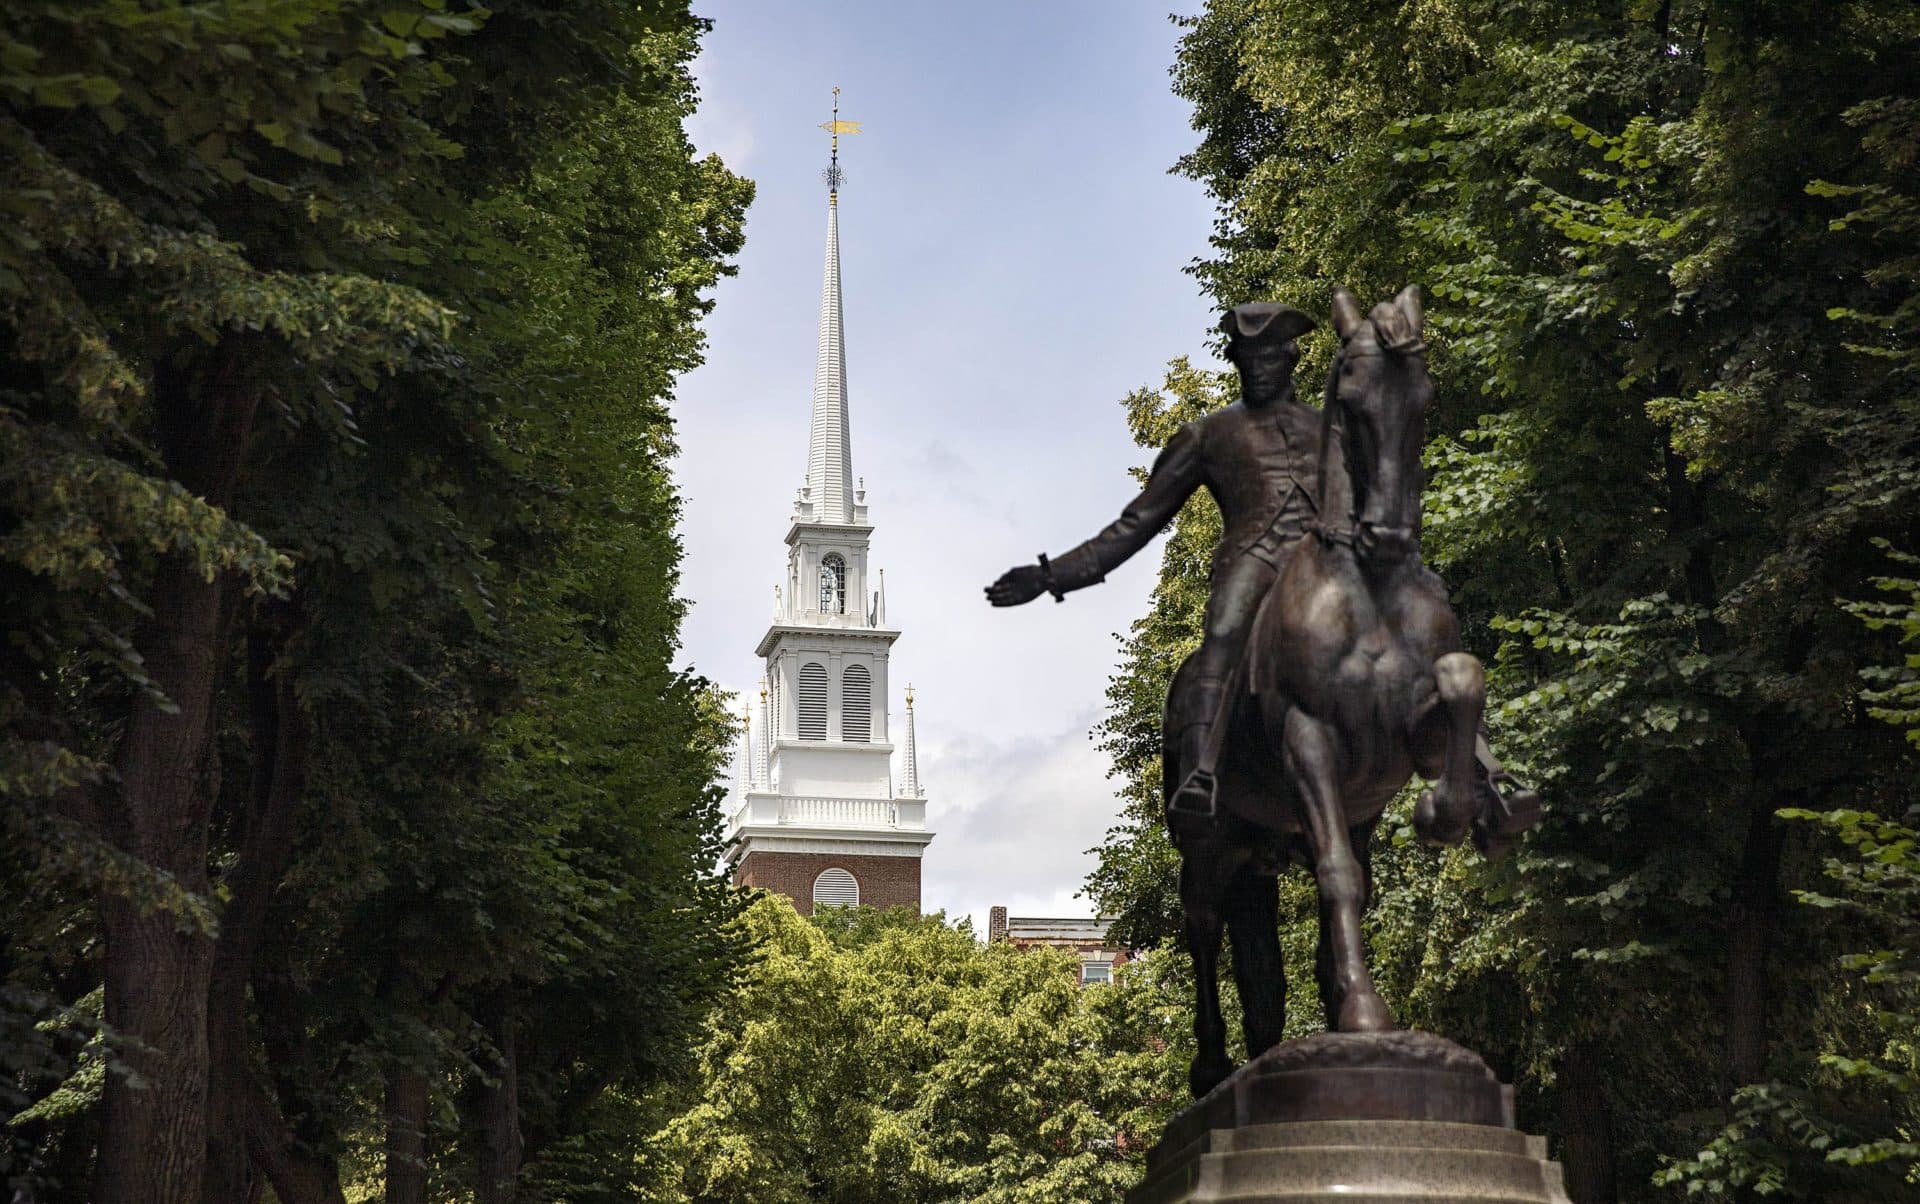 A statue of Paul Revere in front of the Old North Church bell tower in Boston's North End. The photo was taken by Robin Lubbock for WBUR.